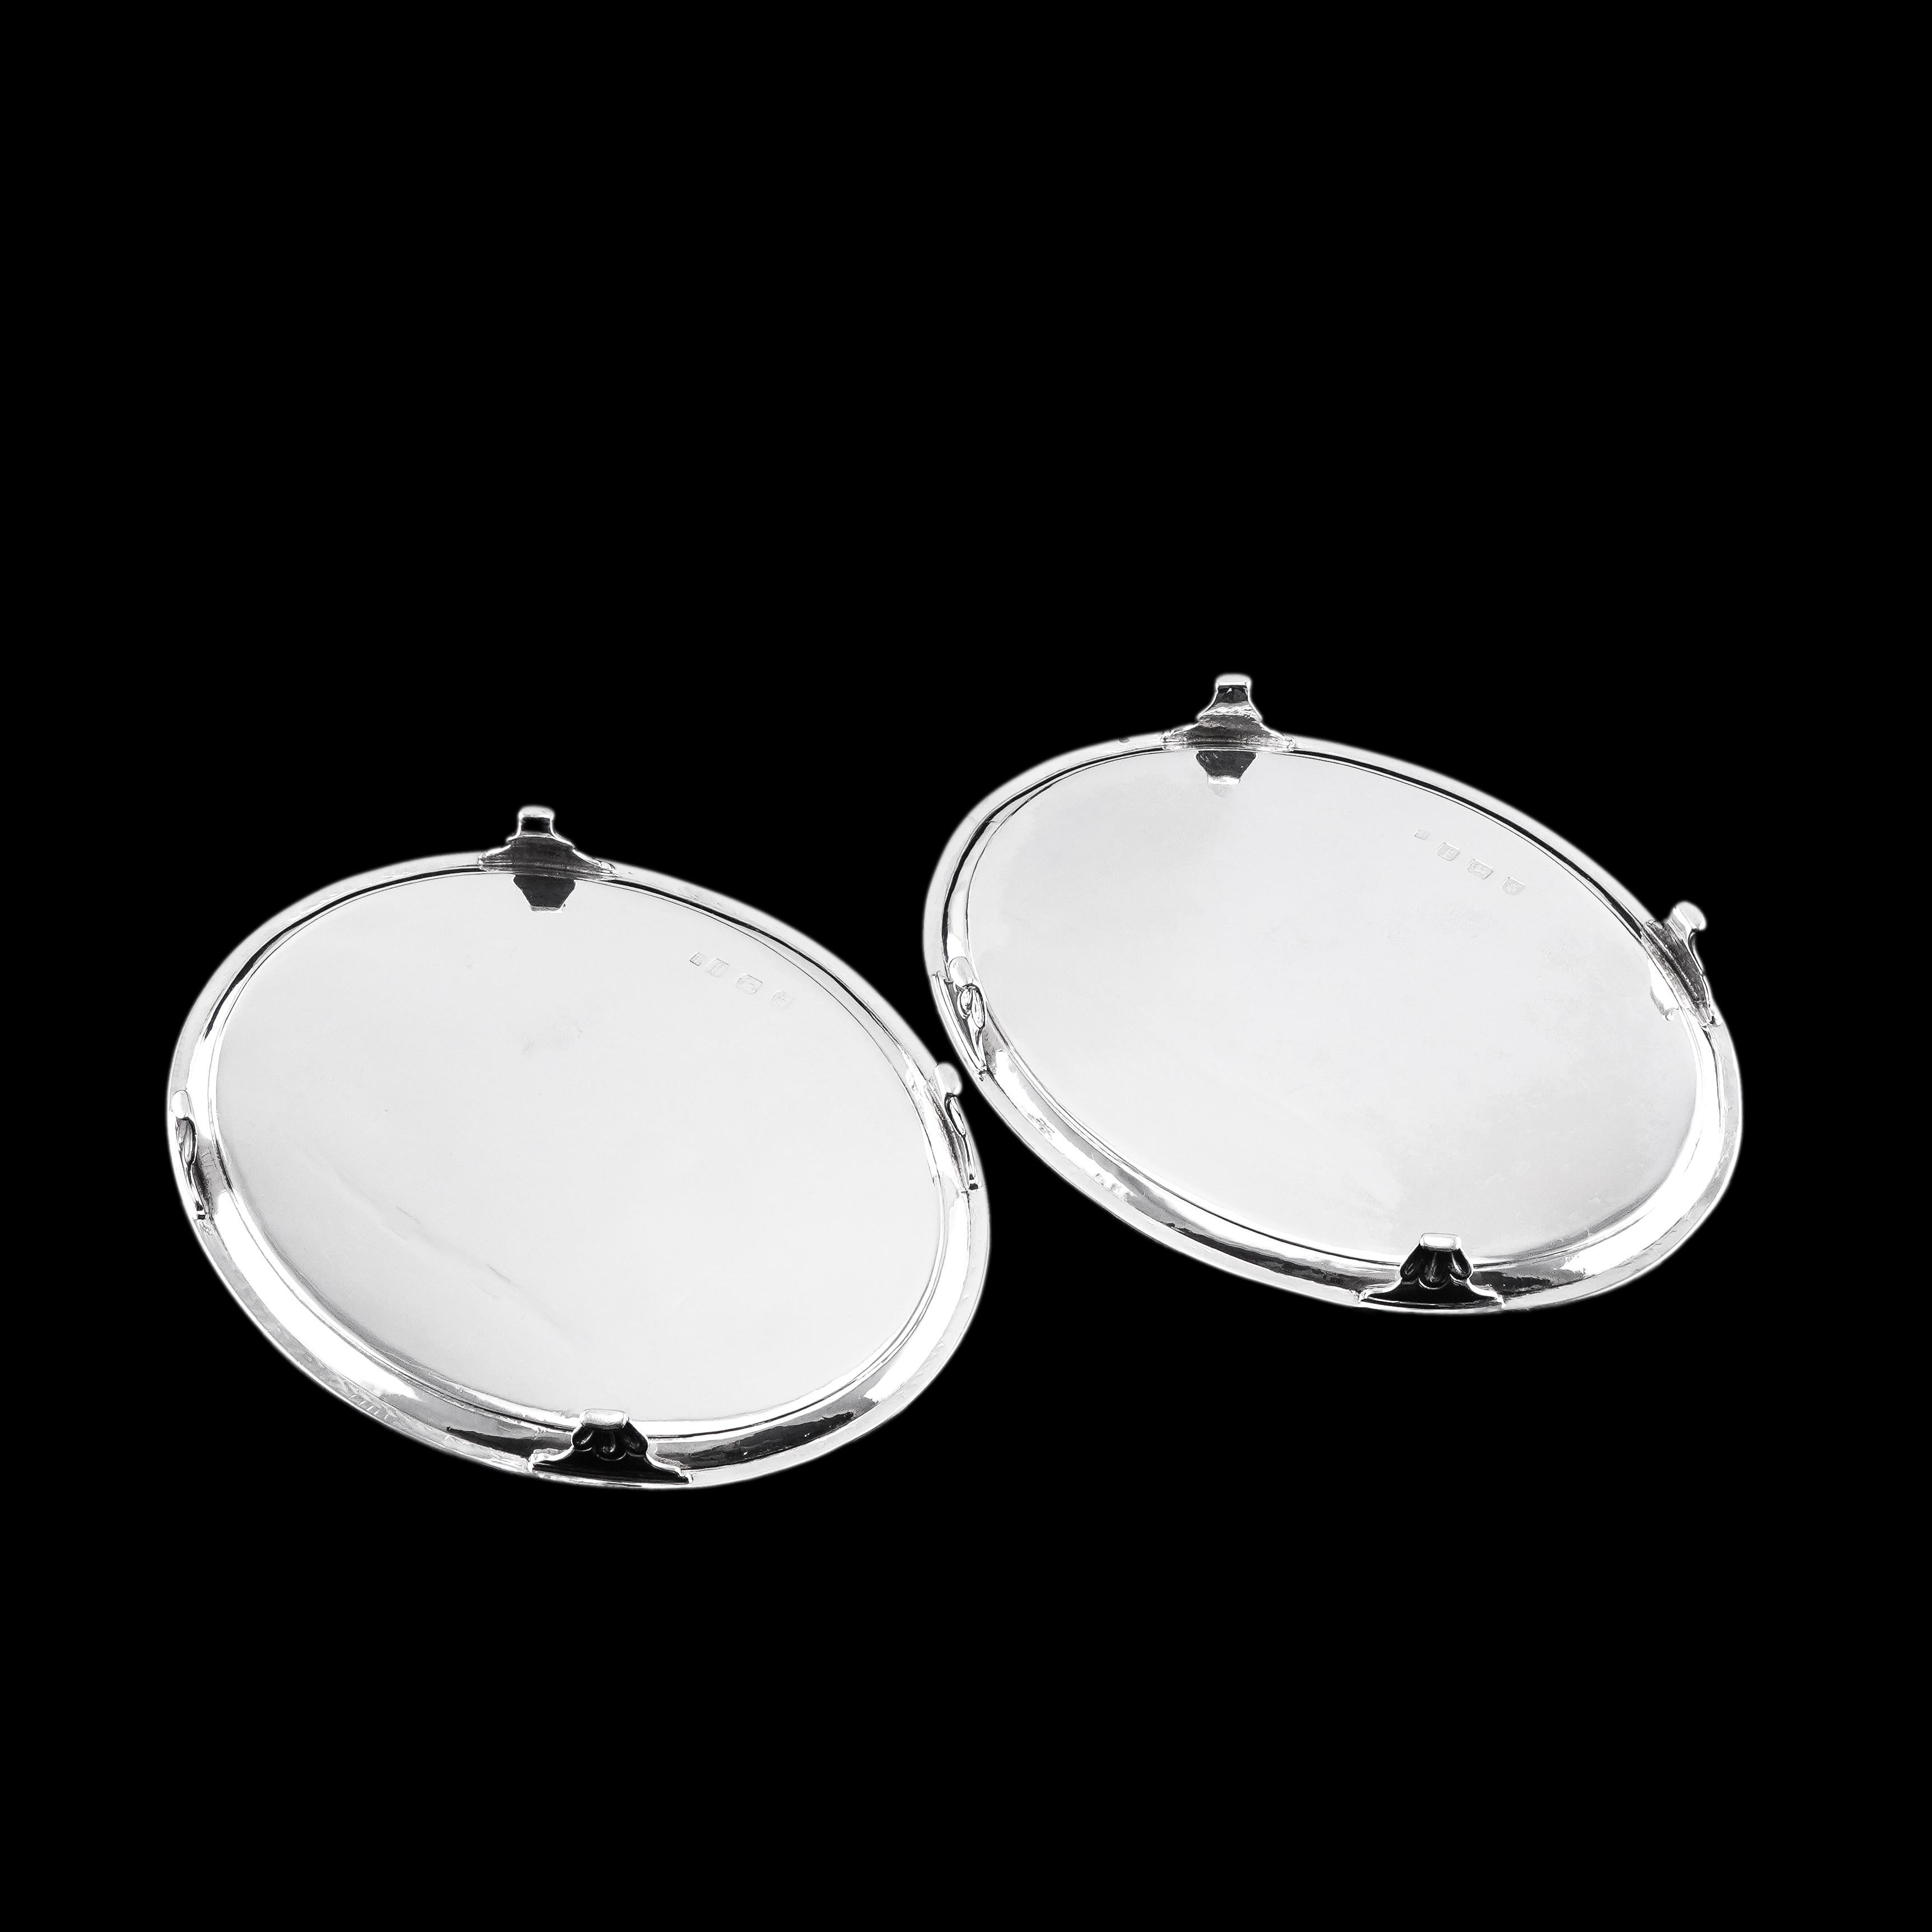 Antique Georgian Solid Sterling Silver Salver Pair in Neoclassical Design - 1781 For Sale 12